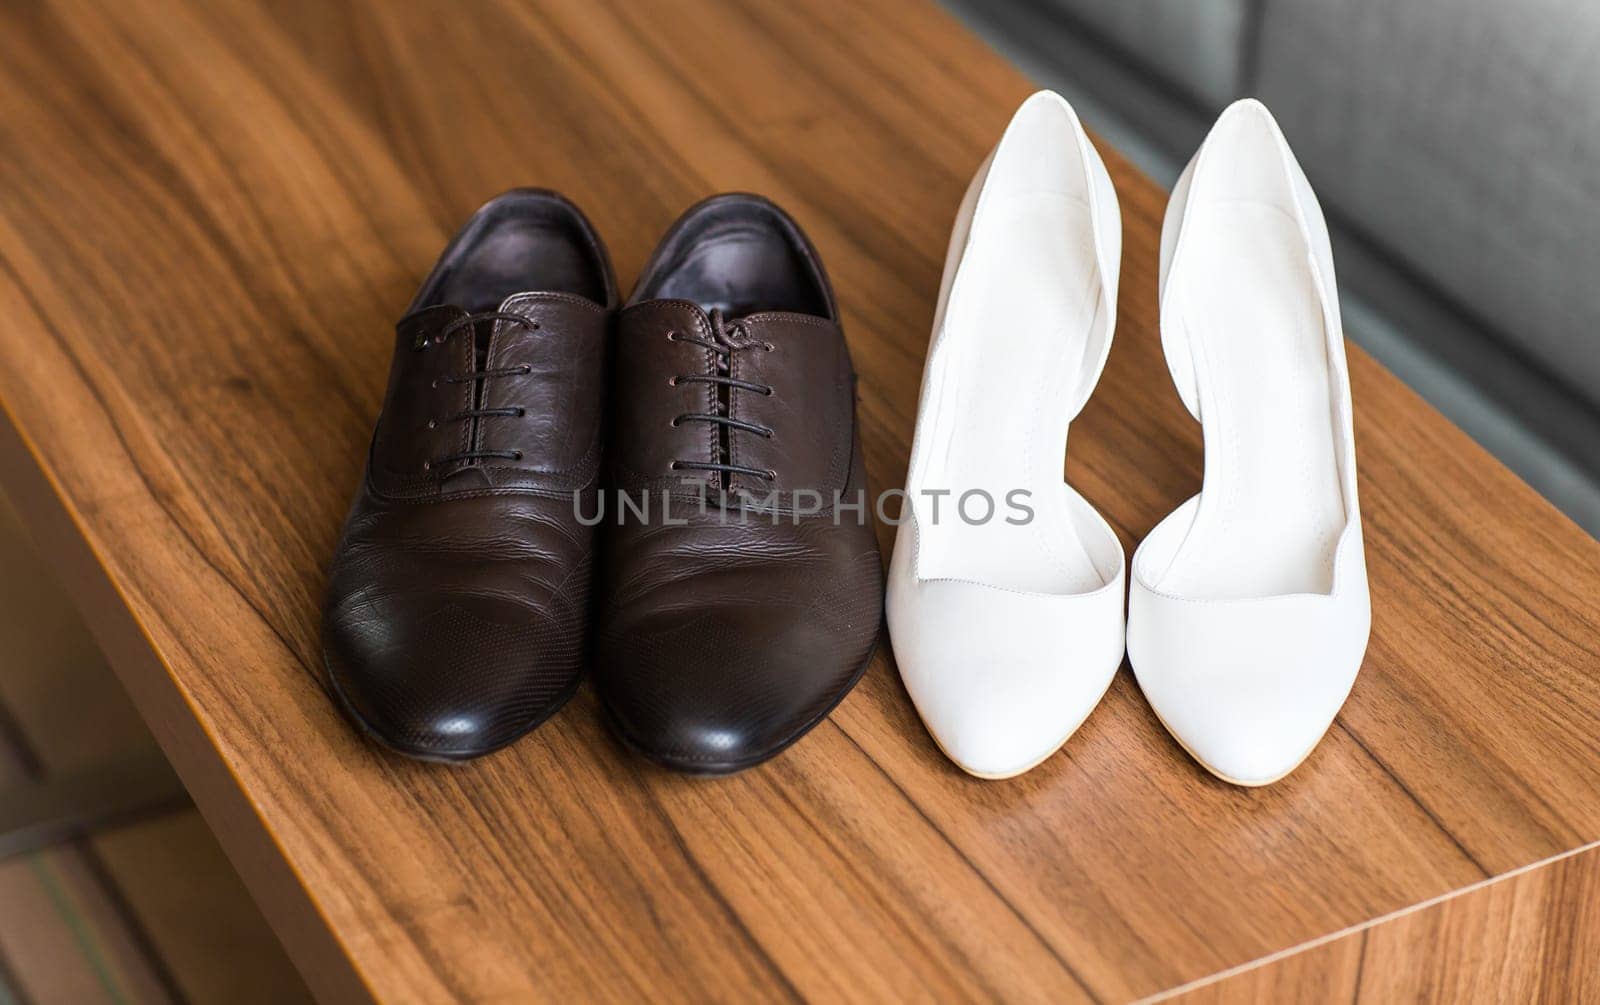 Man and woman shoes. A pair of wedding shoes